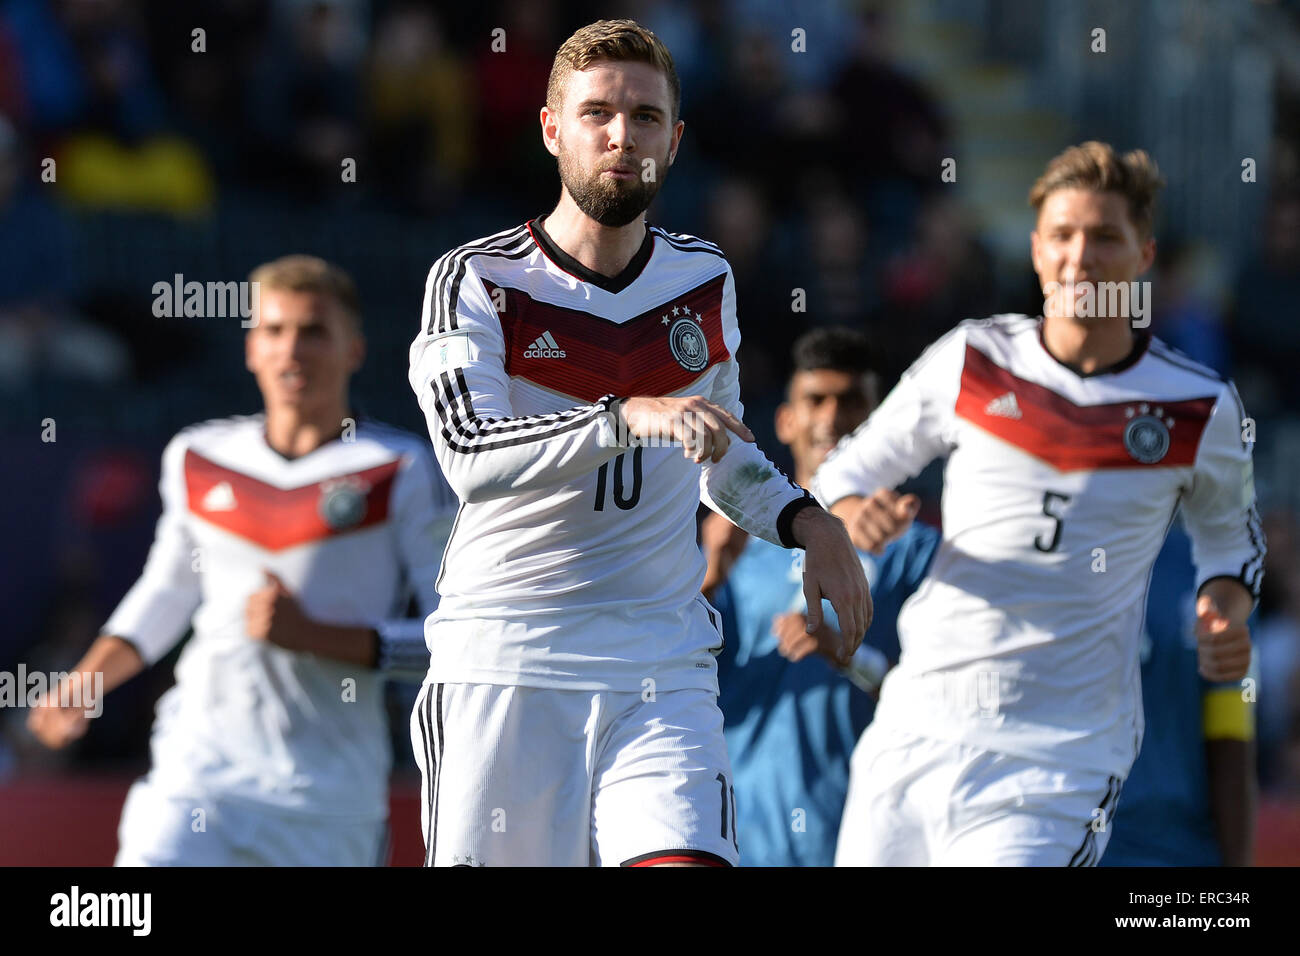 Christchurch, New Zealand, Highlight. 1st June, 2015. Christchurch, New Zealand - June 1, 2015 - Marc Stendera of Germany (M) and his teammates celebrating a goal during the FIFA U20 World Cup Group F match between Germany and Fiji at AMI Stadium on June 1, 2015 in Christchurch, New Zealand, Highlight. Credit:  dpa/Alamy Live News Stock Photo